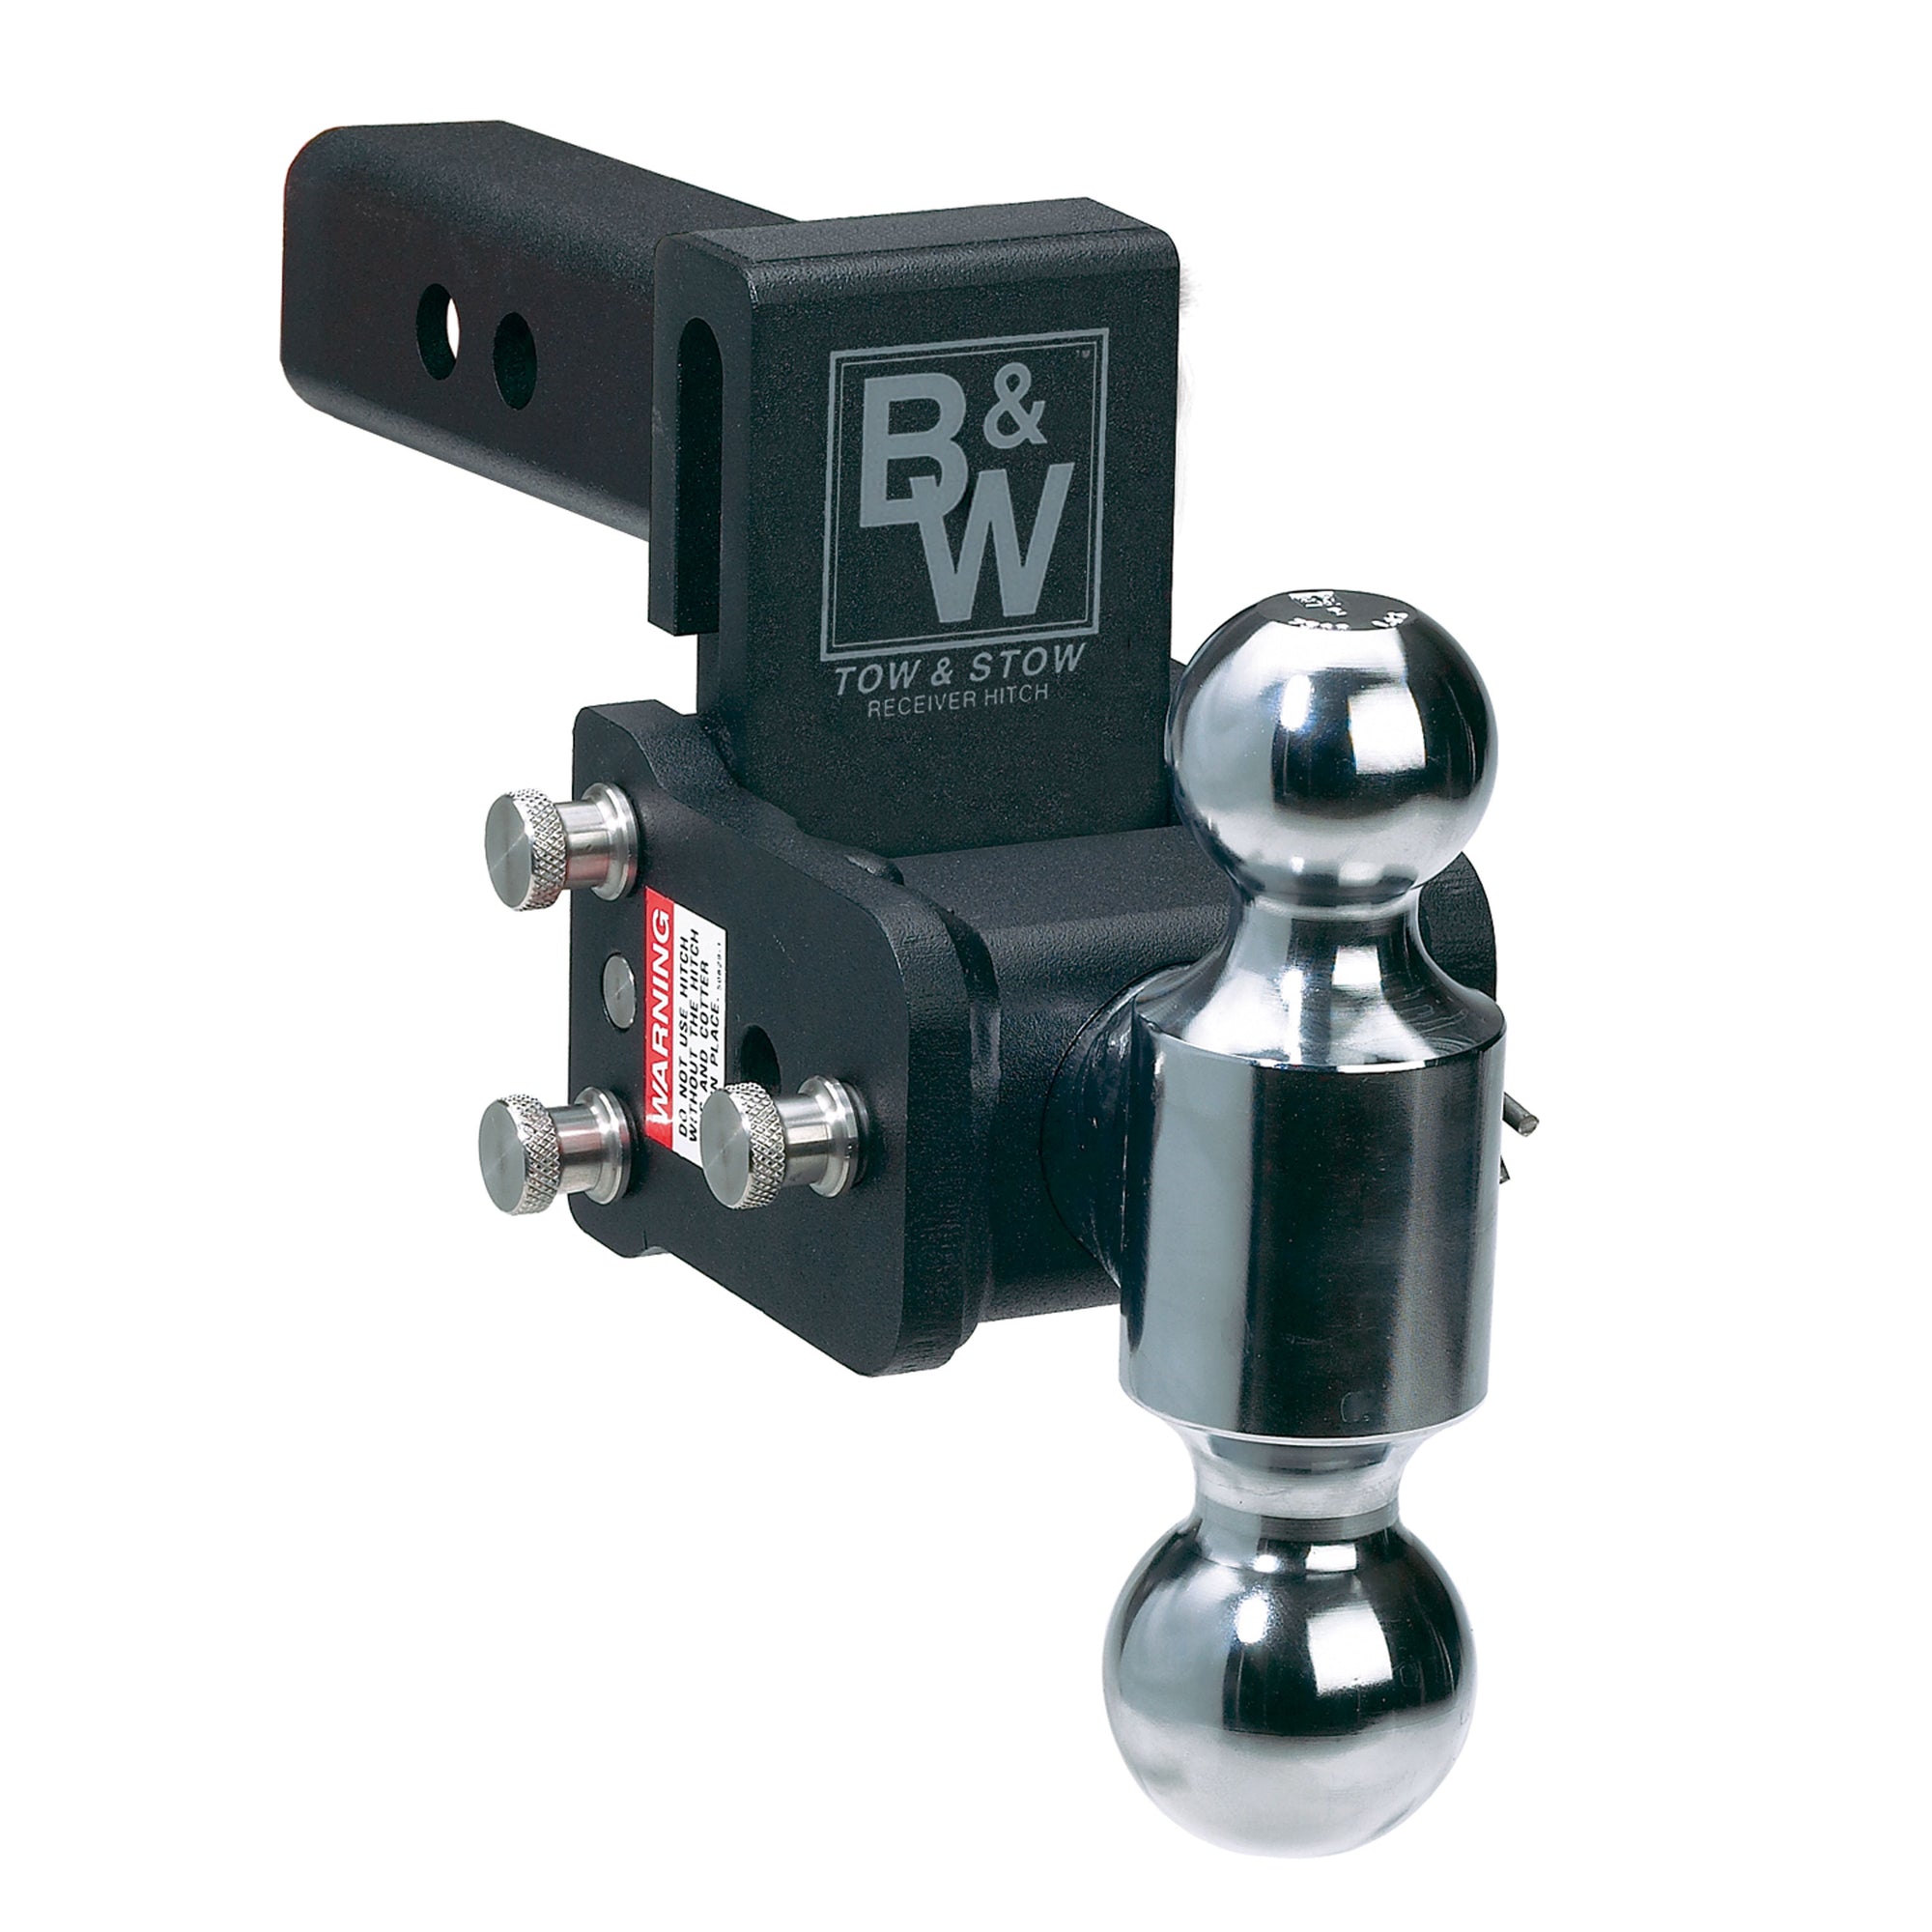 B&W Trailer Hitches TS10040B Tow and Stow Adjustable Ball Mount - 2-5/16" & 2" Ball, 7" Drop, 7.5" Rise, Black